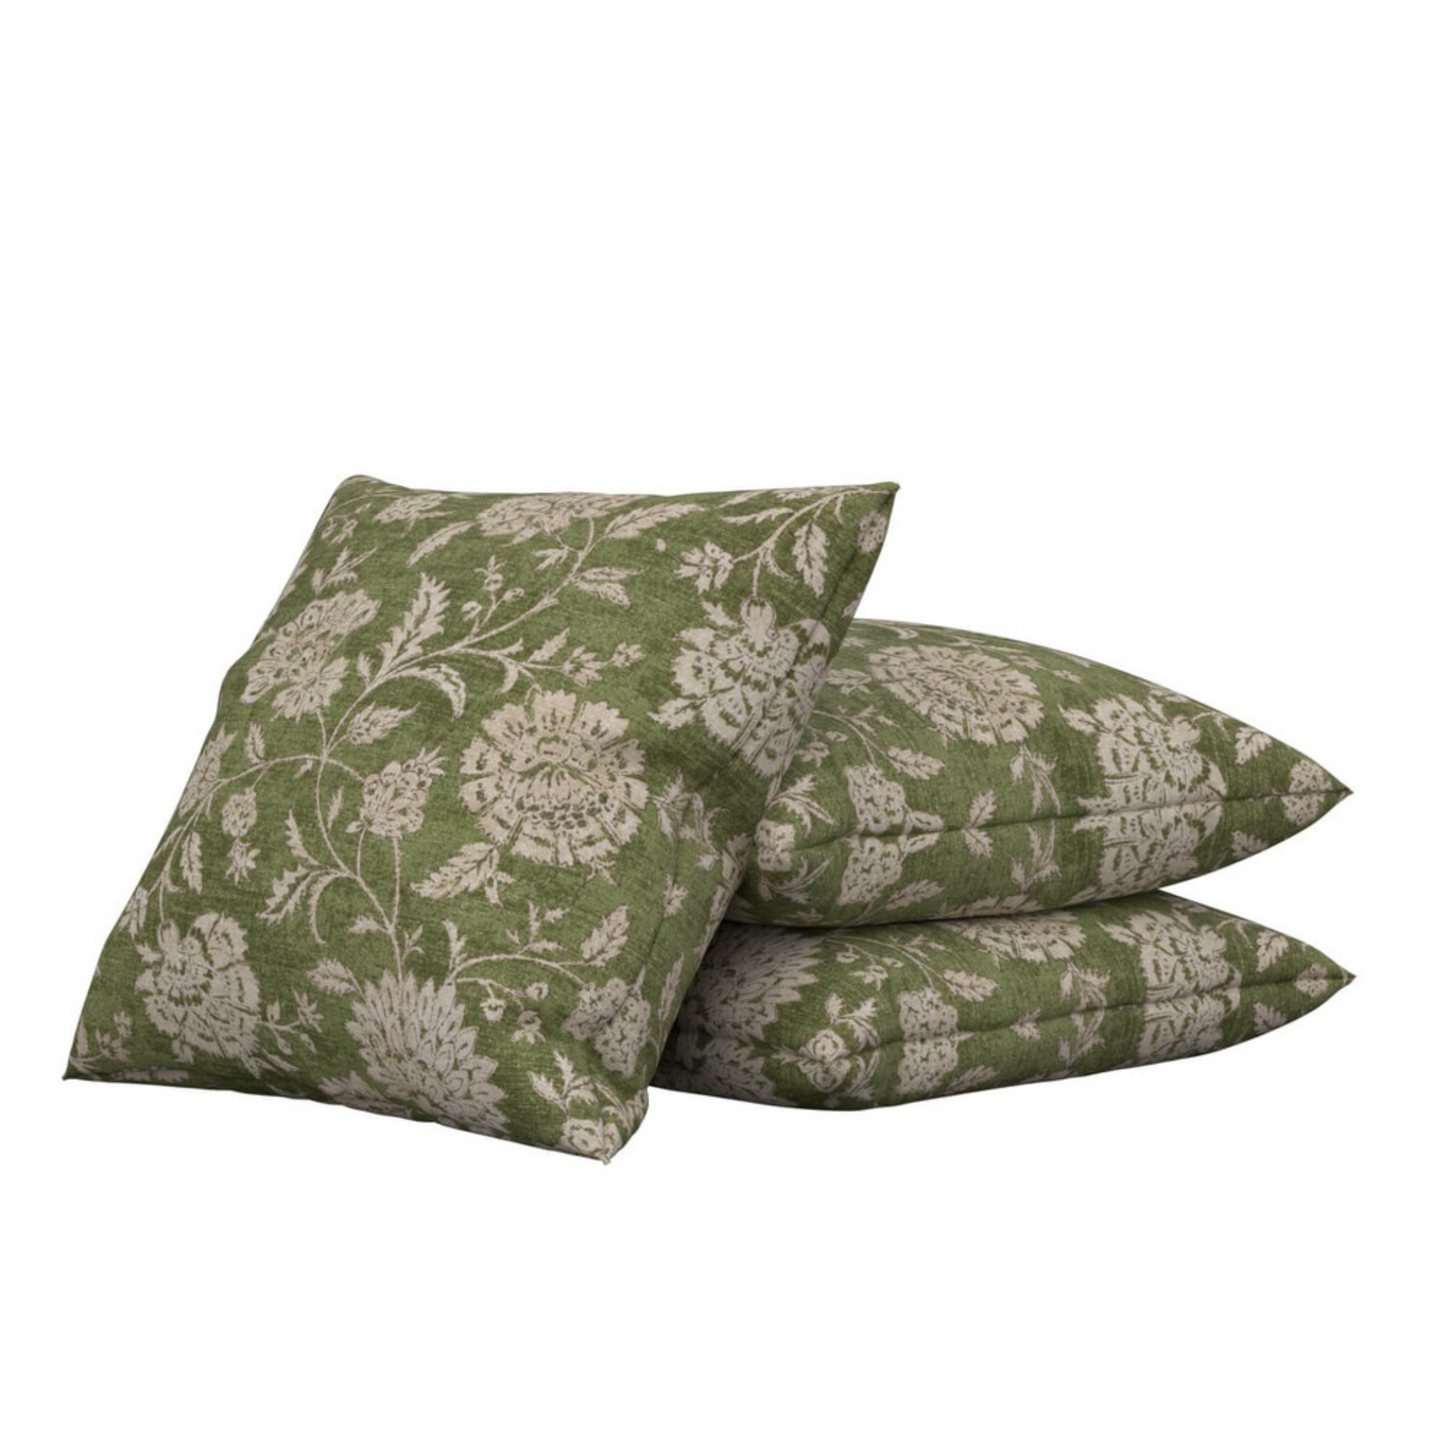 Olive Green Floral & Foliage Pillow Cover - Available in Lumbar, Bolster, Throw, Euro Sham Sizes